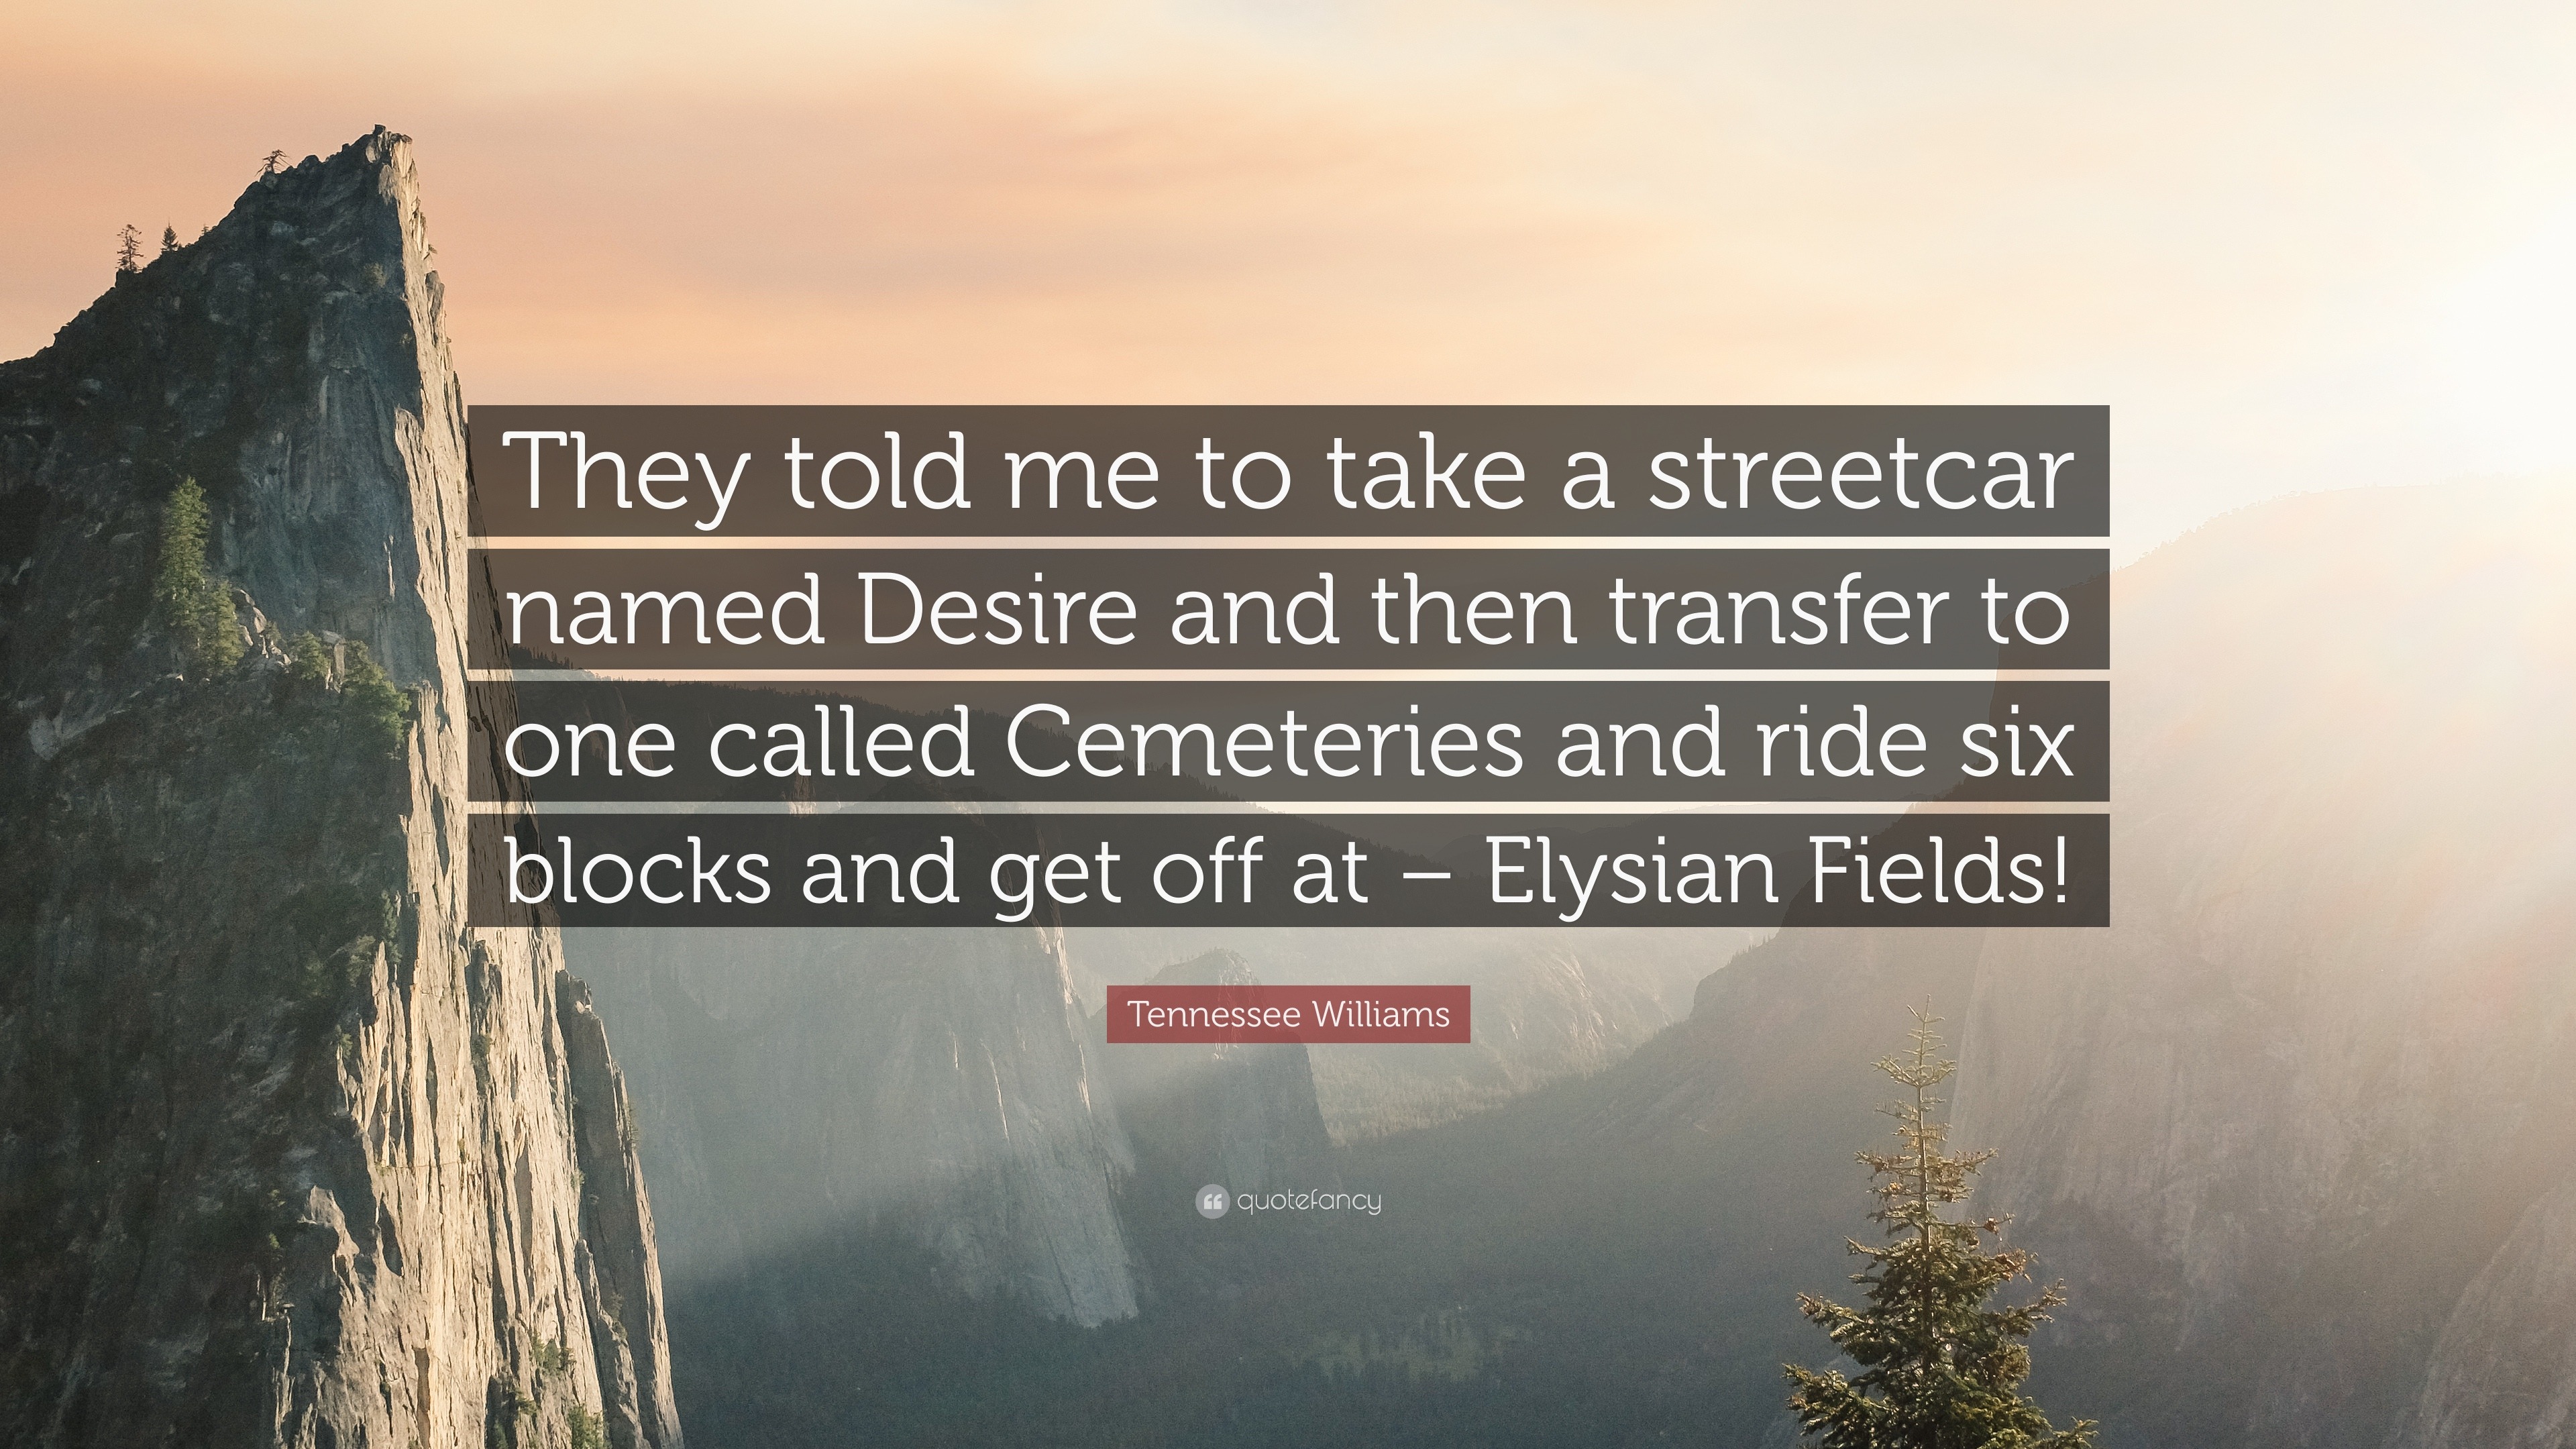 a streetcar named desire quotes for essays